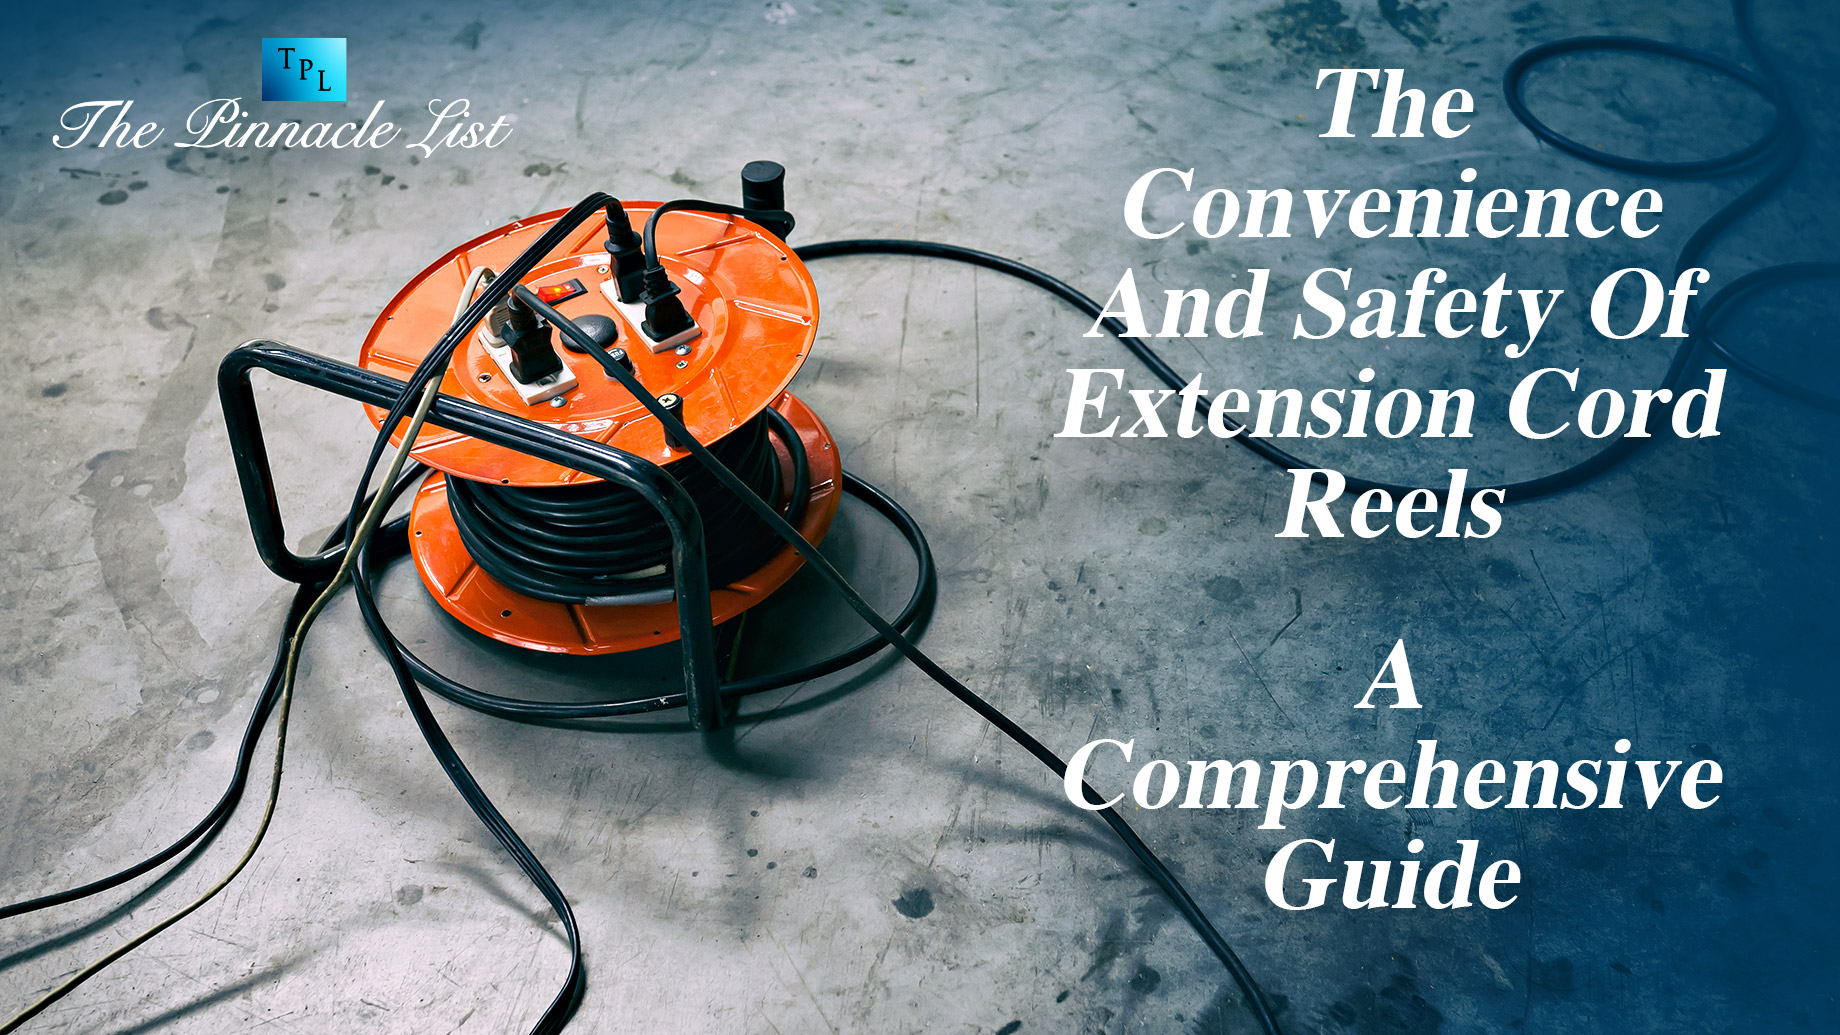 The Convenience And Safety Of Extension Cord Reels: A Comprehensive Guide